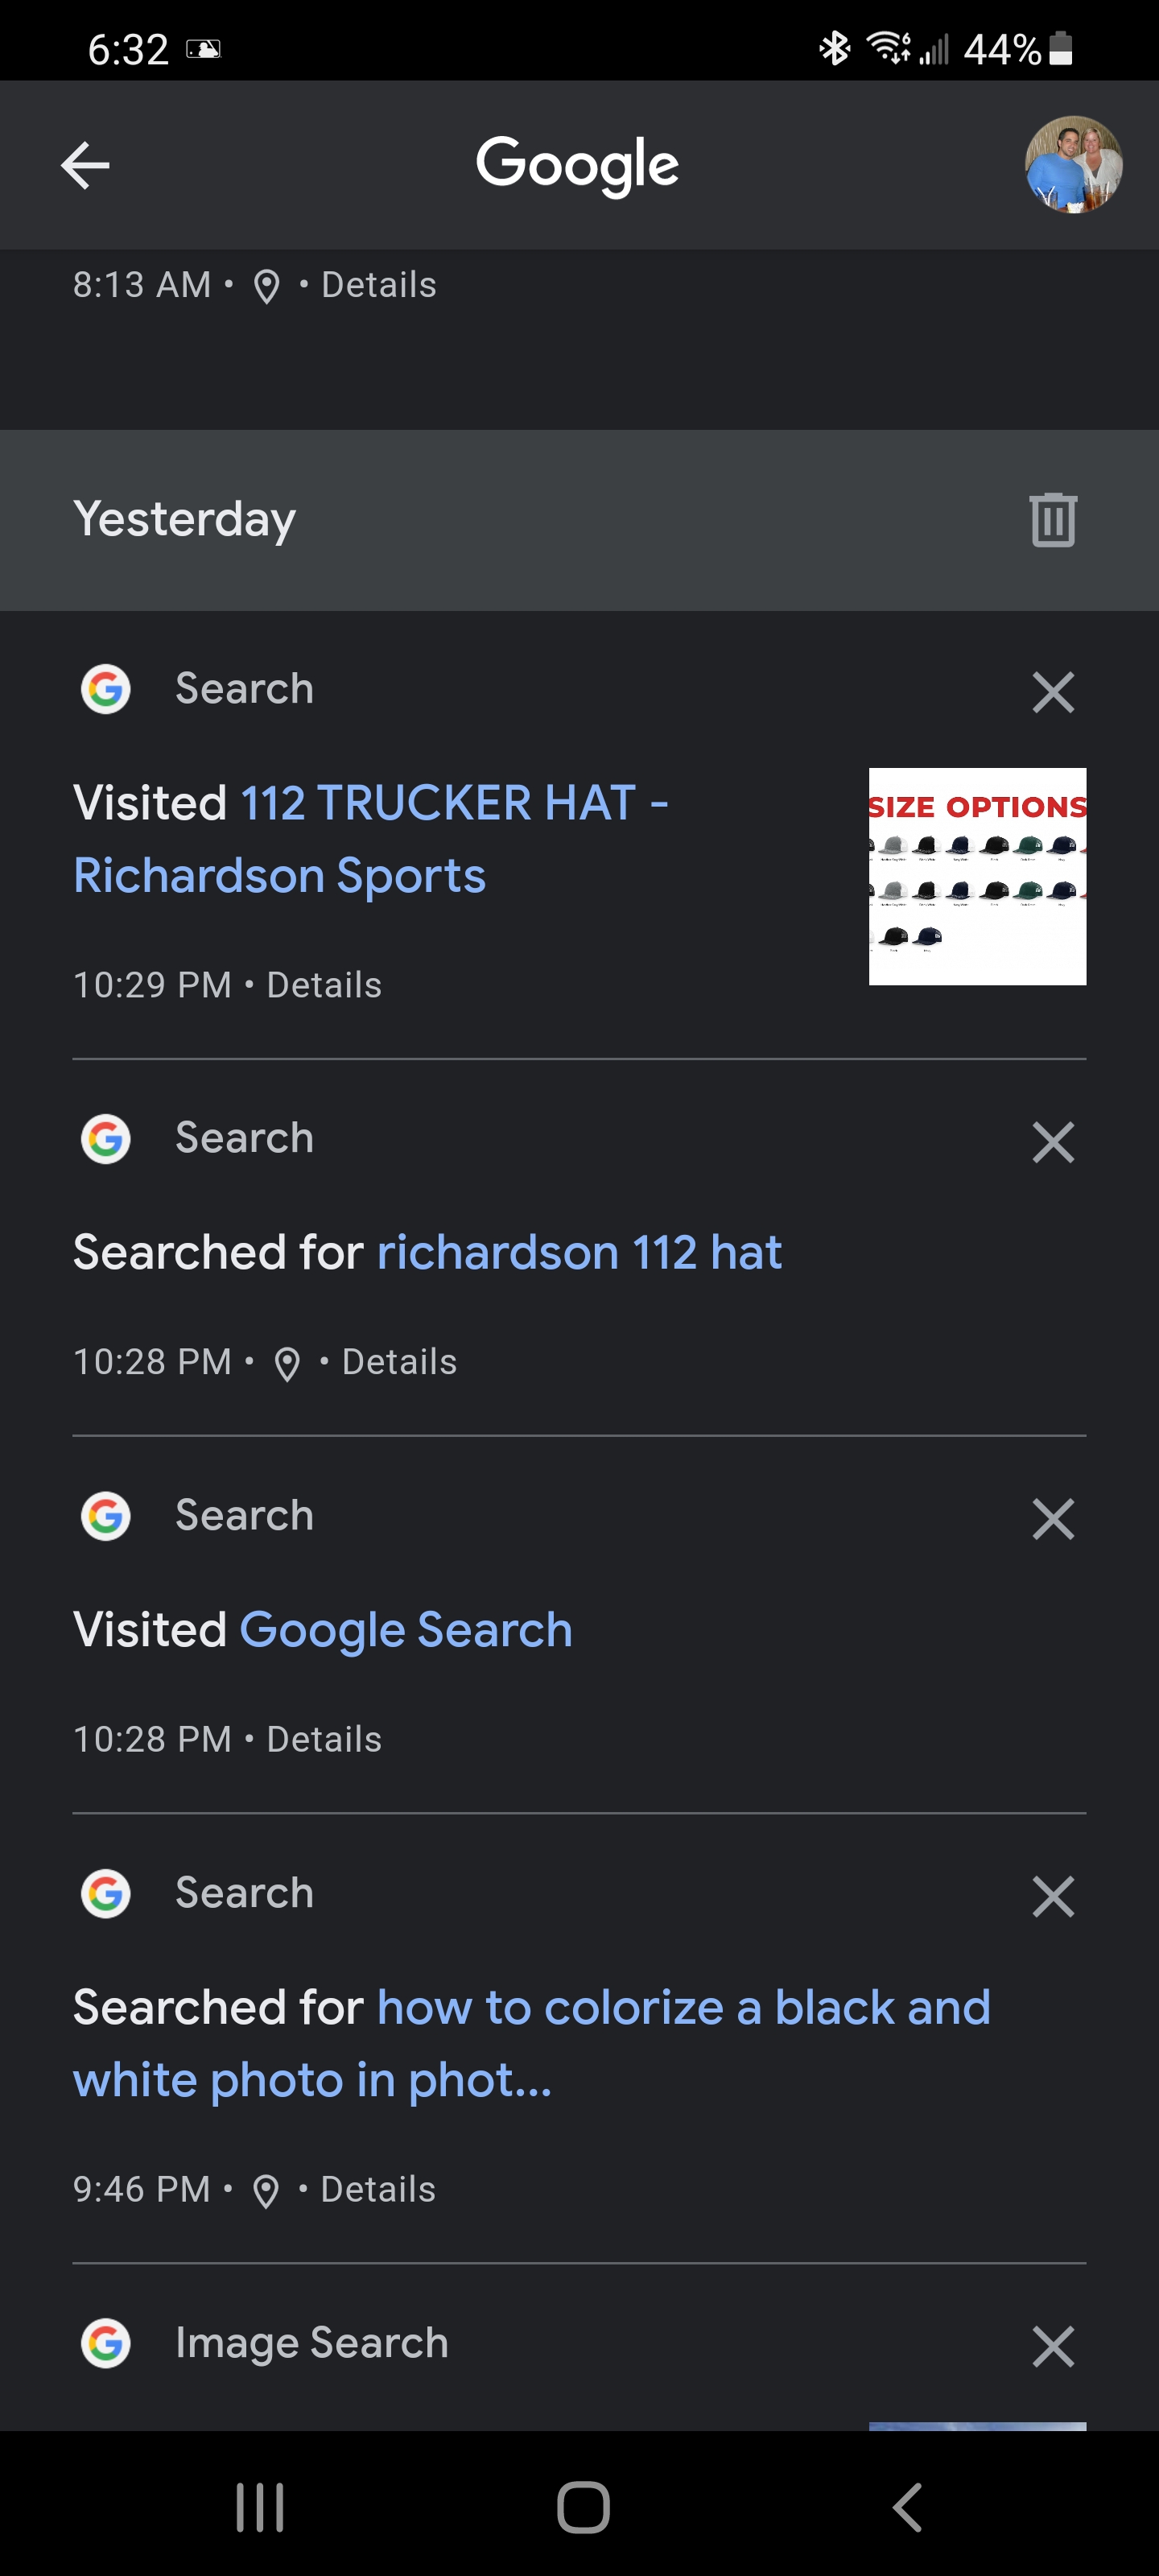 Show Up In Searches